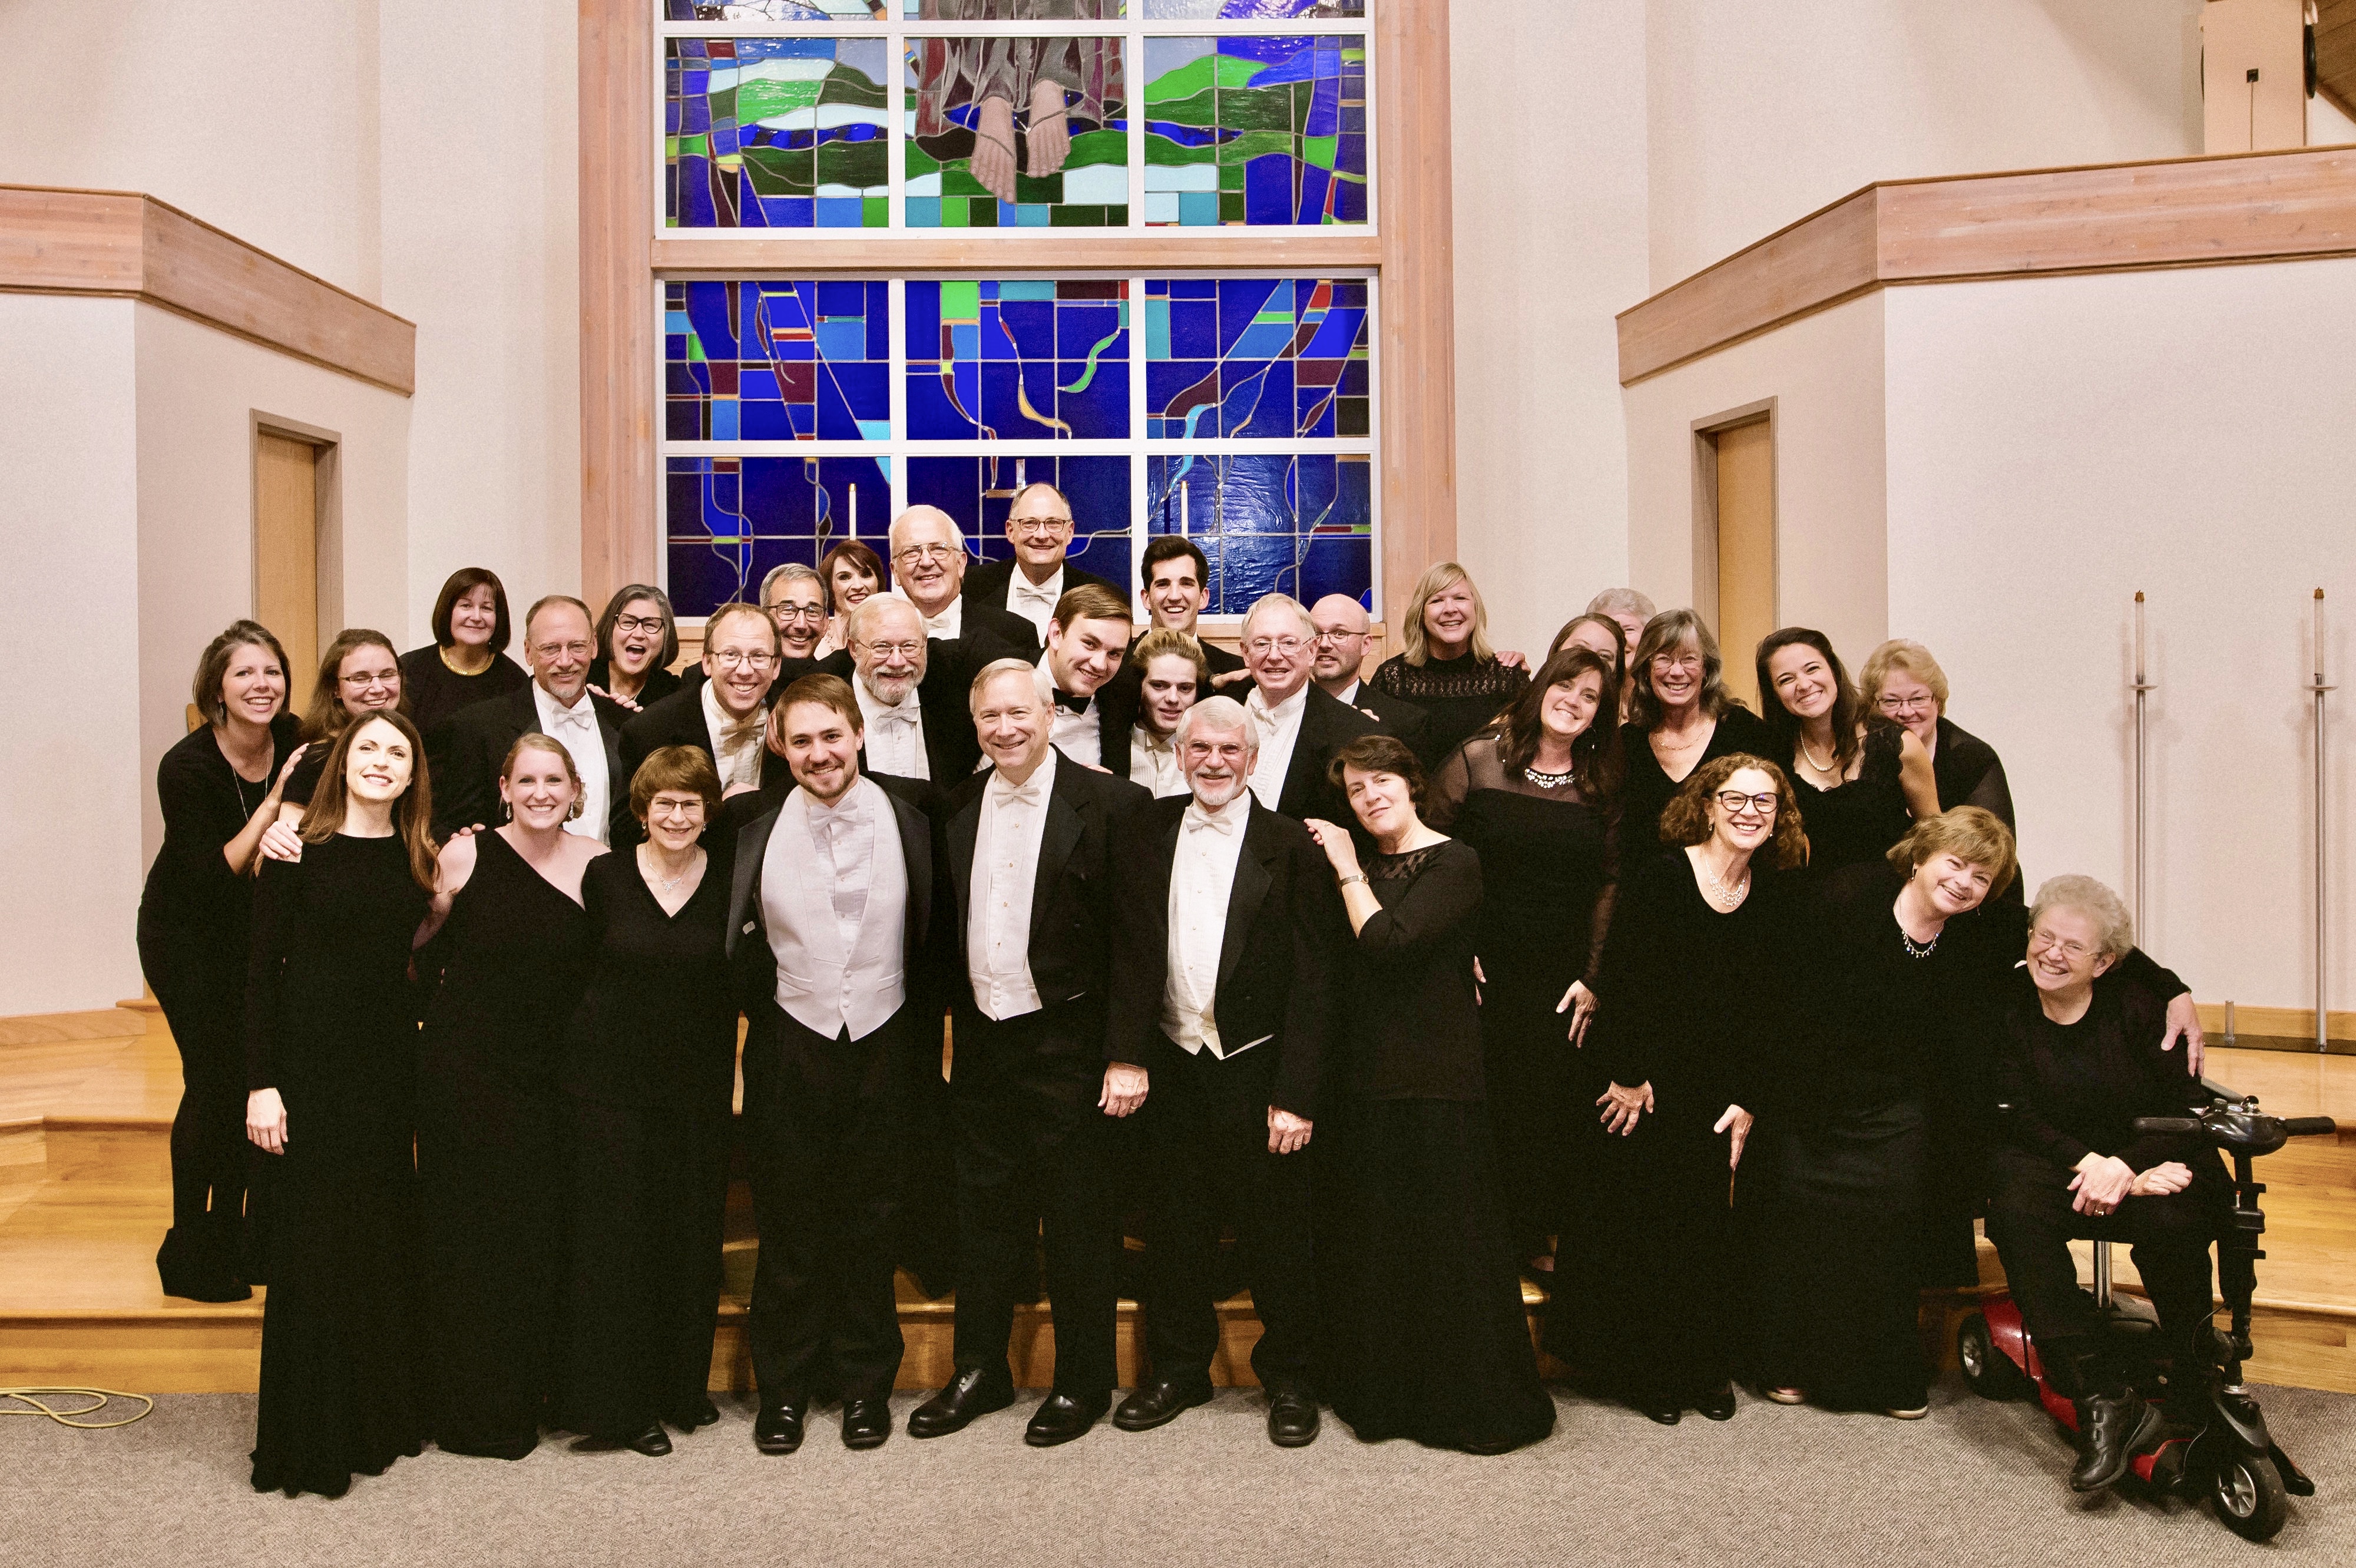 Hillsdale Arts Chorale presents ‘Together’ with Bel Canto Singers